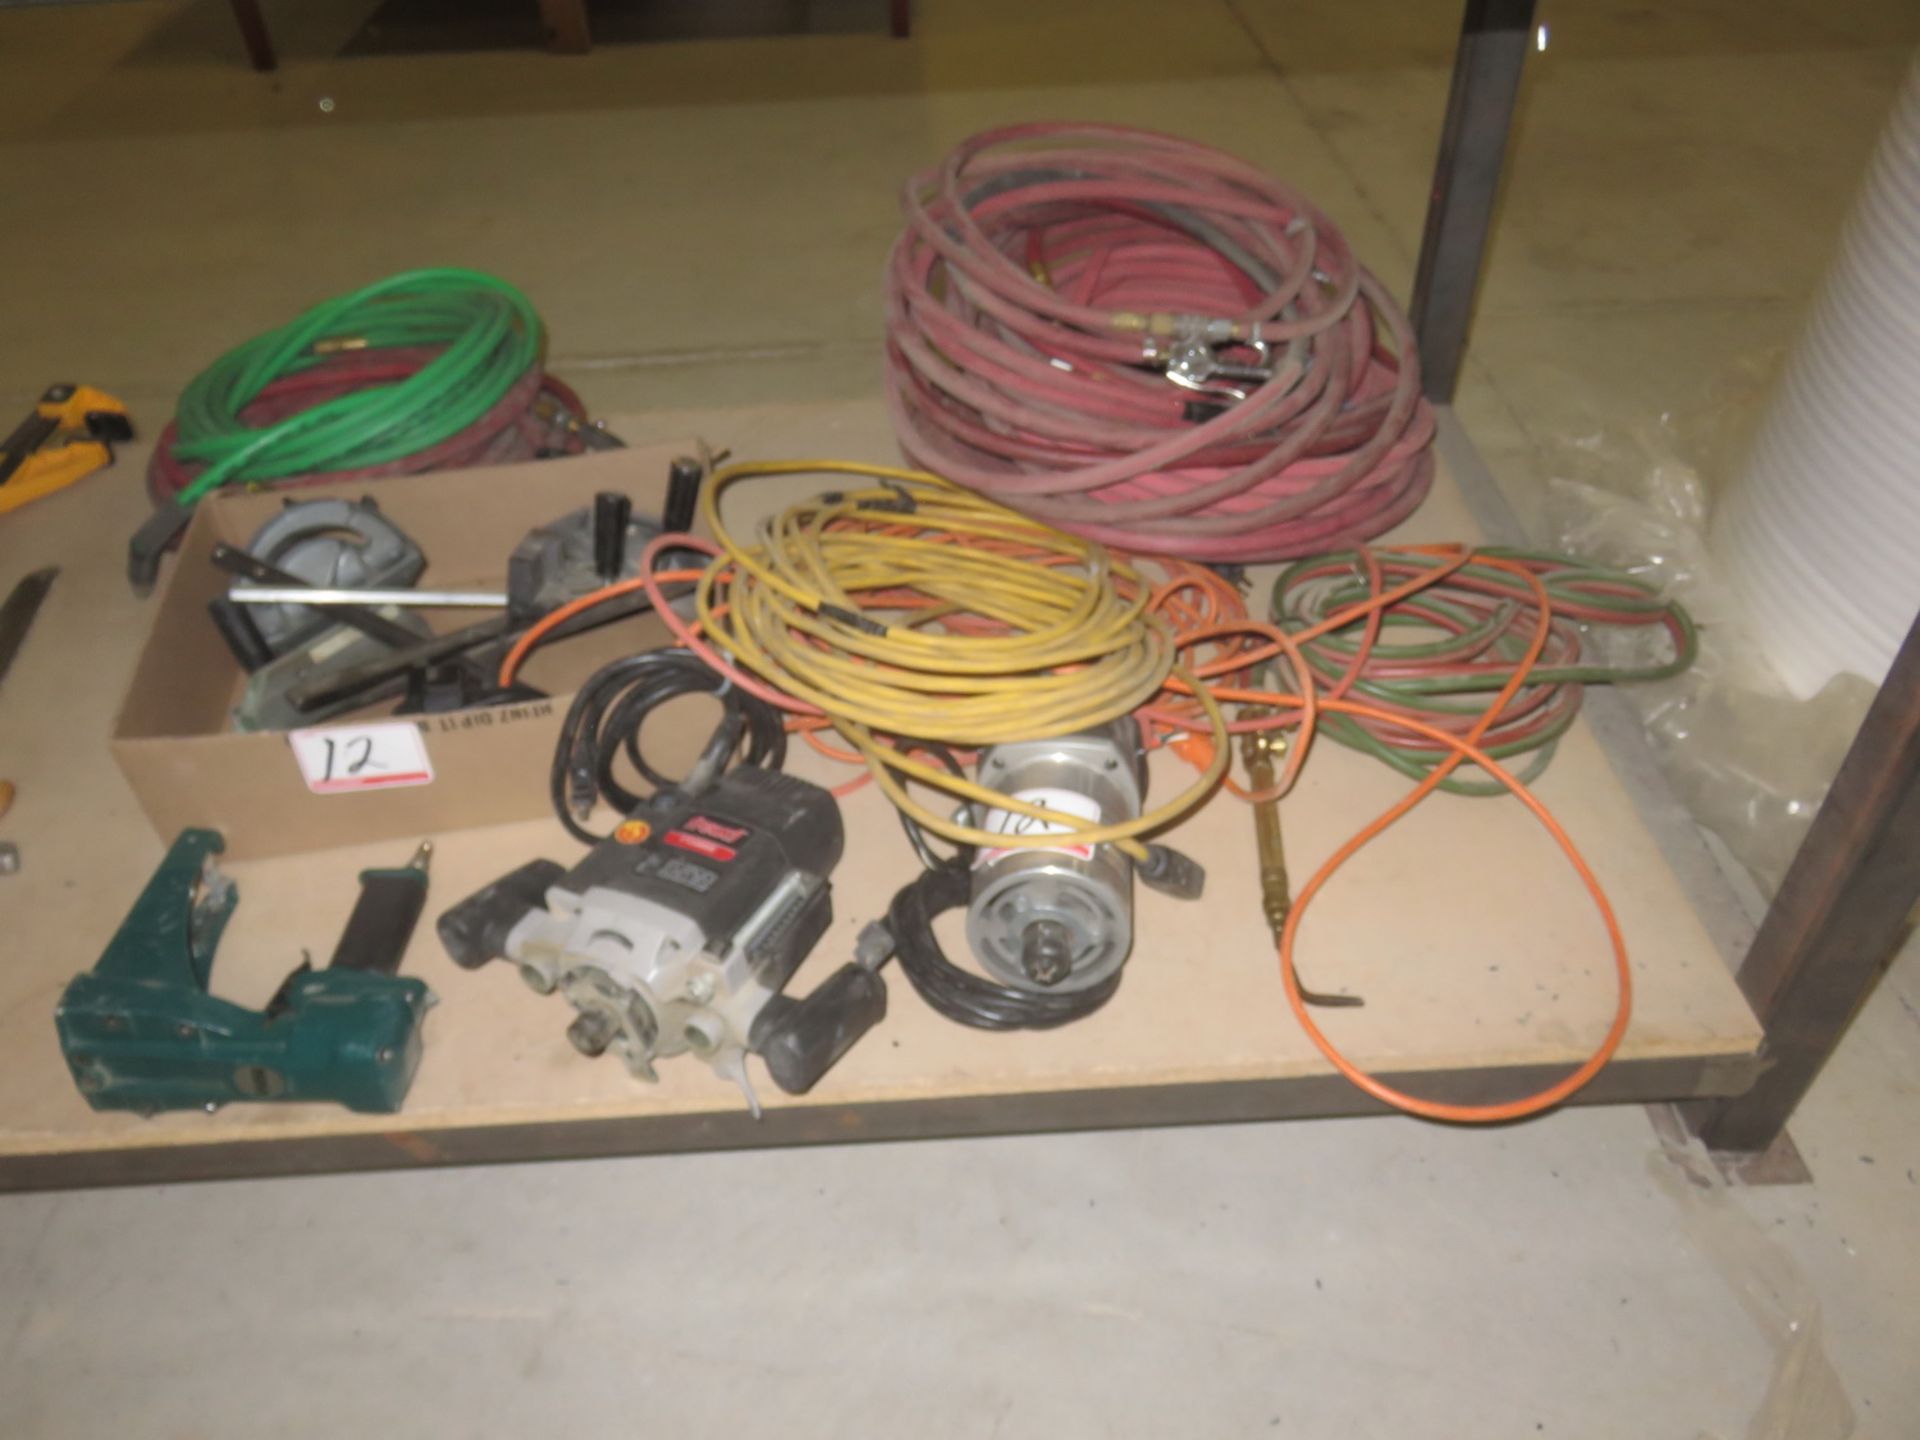 LOT - ROUTERS, STAPLE GUN (AS IS), EXTENSION CORDS, ACETYLENE TORCH